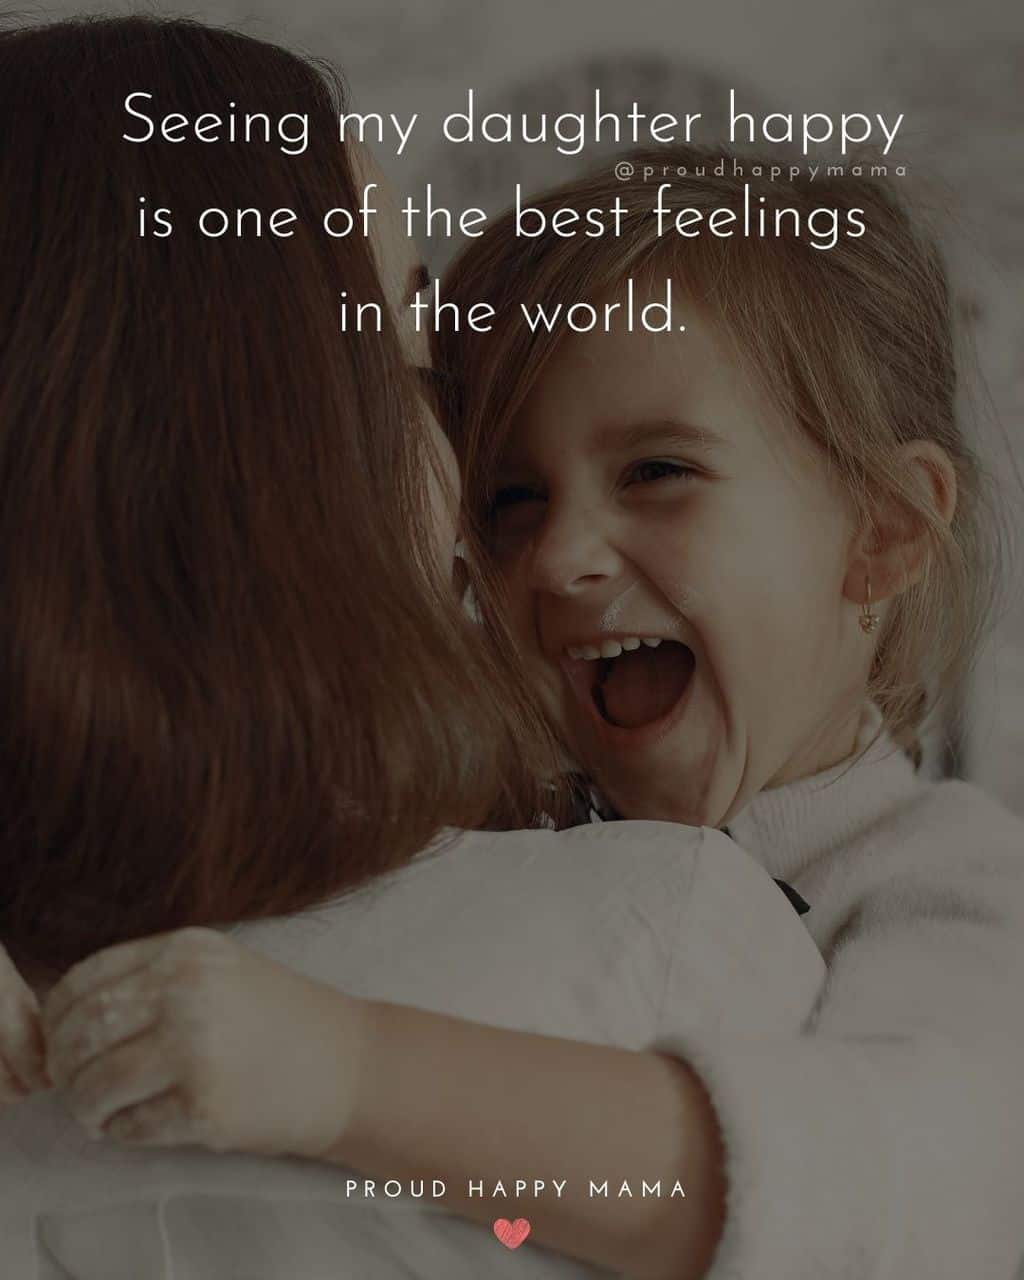 seeing my daughter happy quotes - ‘Seeing my daughter happy is one of the best feelings in the world.’